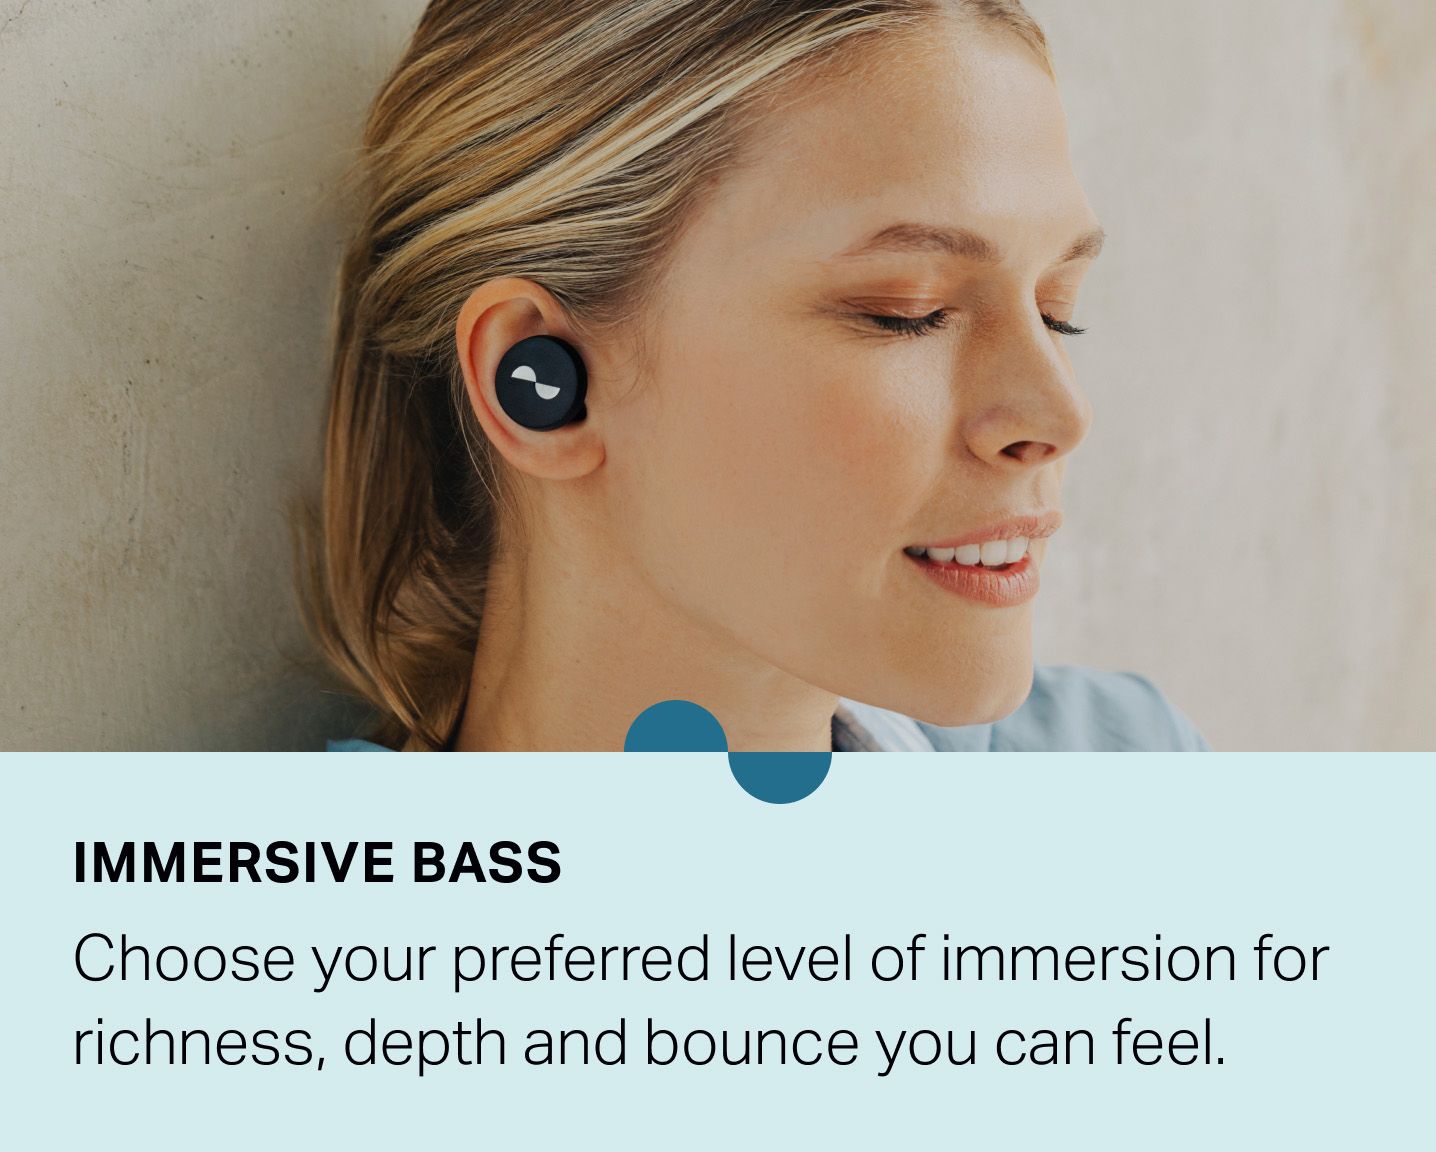 Person wearing NURATRUE earbuds in ears with eyes closed — "Immersive bass: Choose your preferred level of immersion for richness, depth and bounce you can feel."